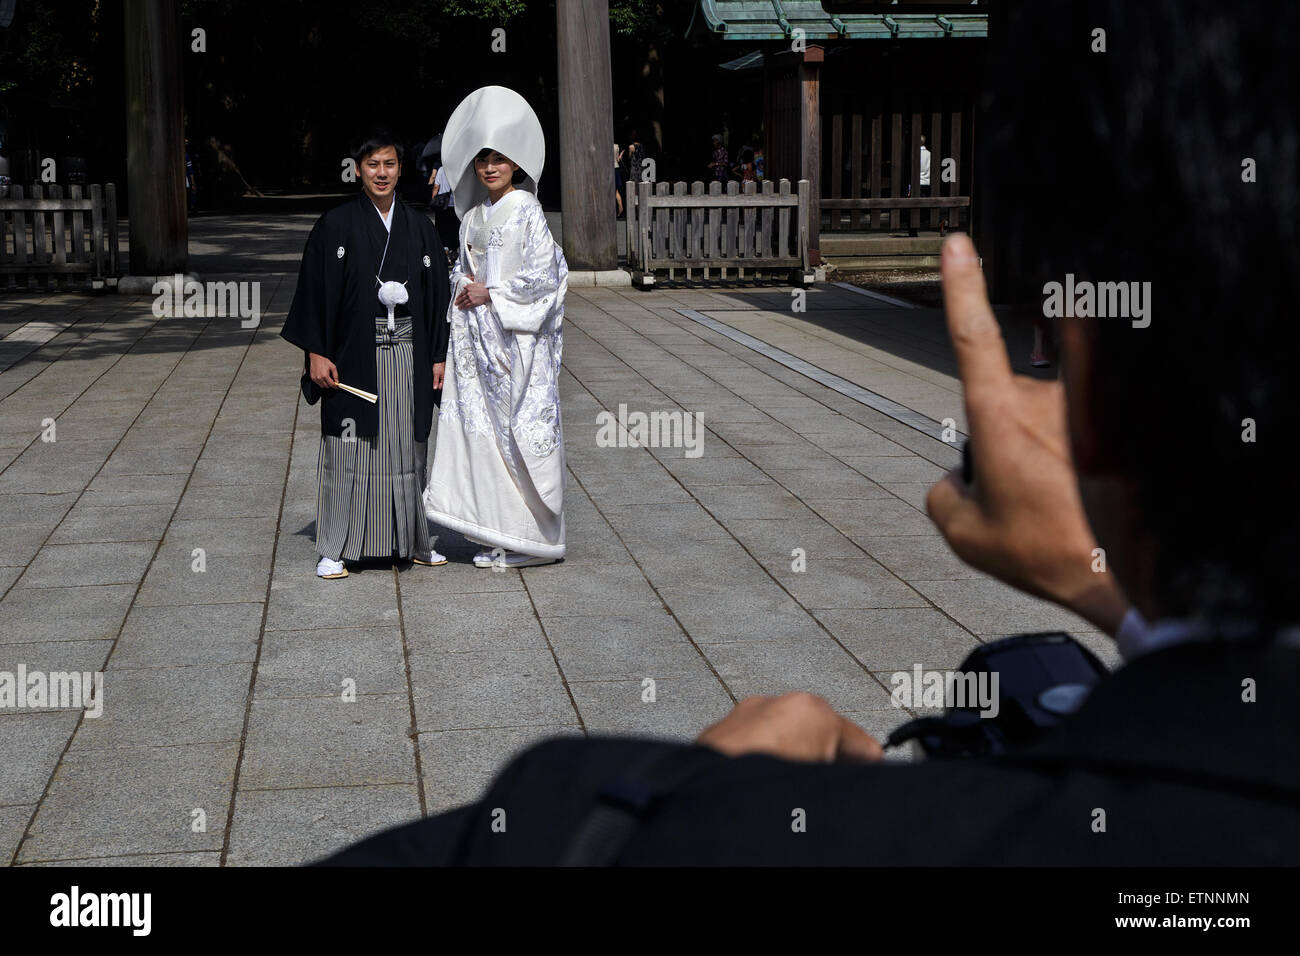 A couple at their traditional Japanese wedding ceremony is having a picture taken at Meiji Jingu shrine in Shibuya, Tokyo, Japan Stock Photo